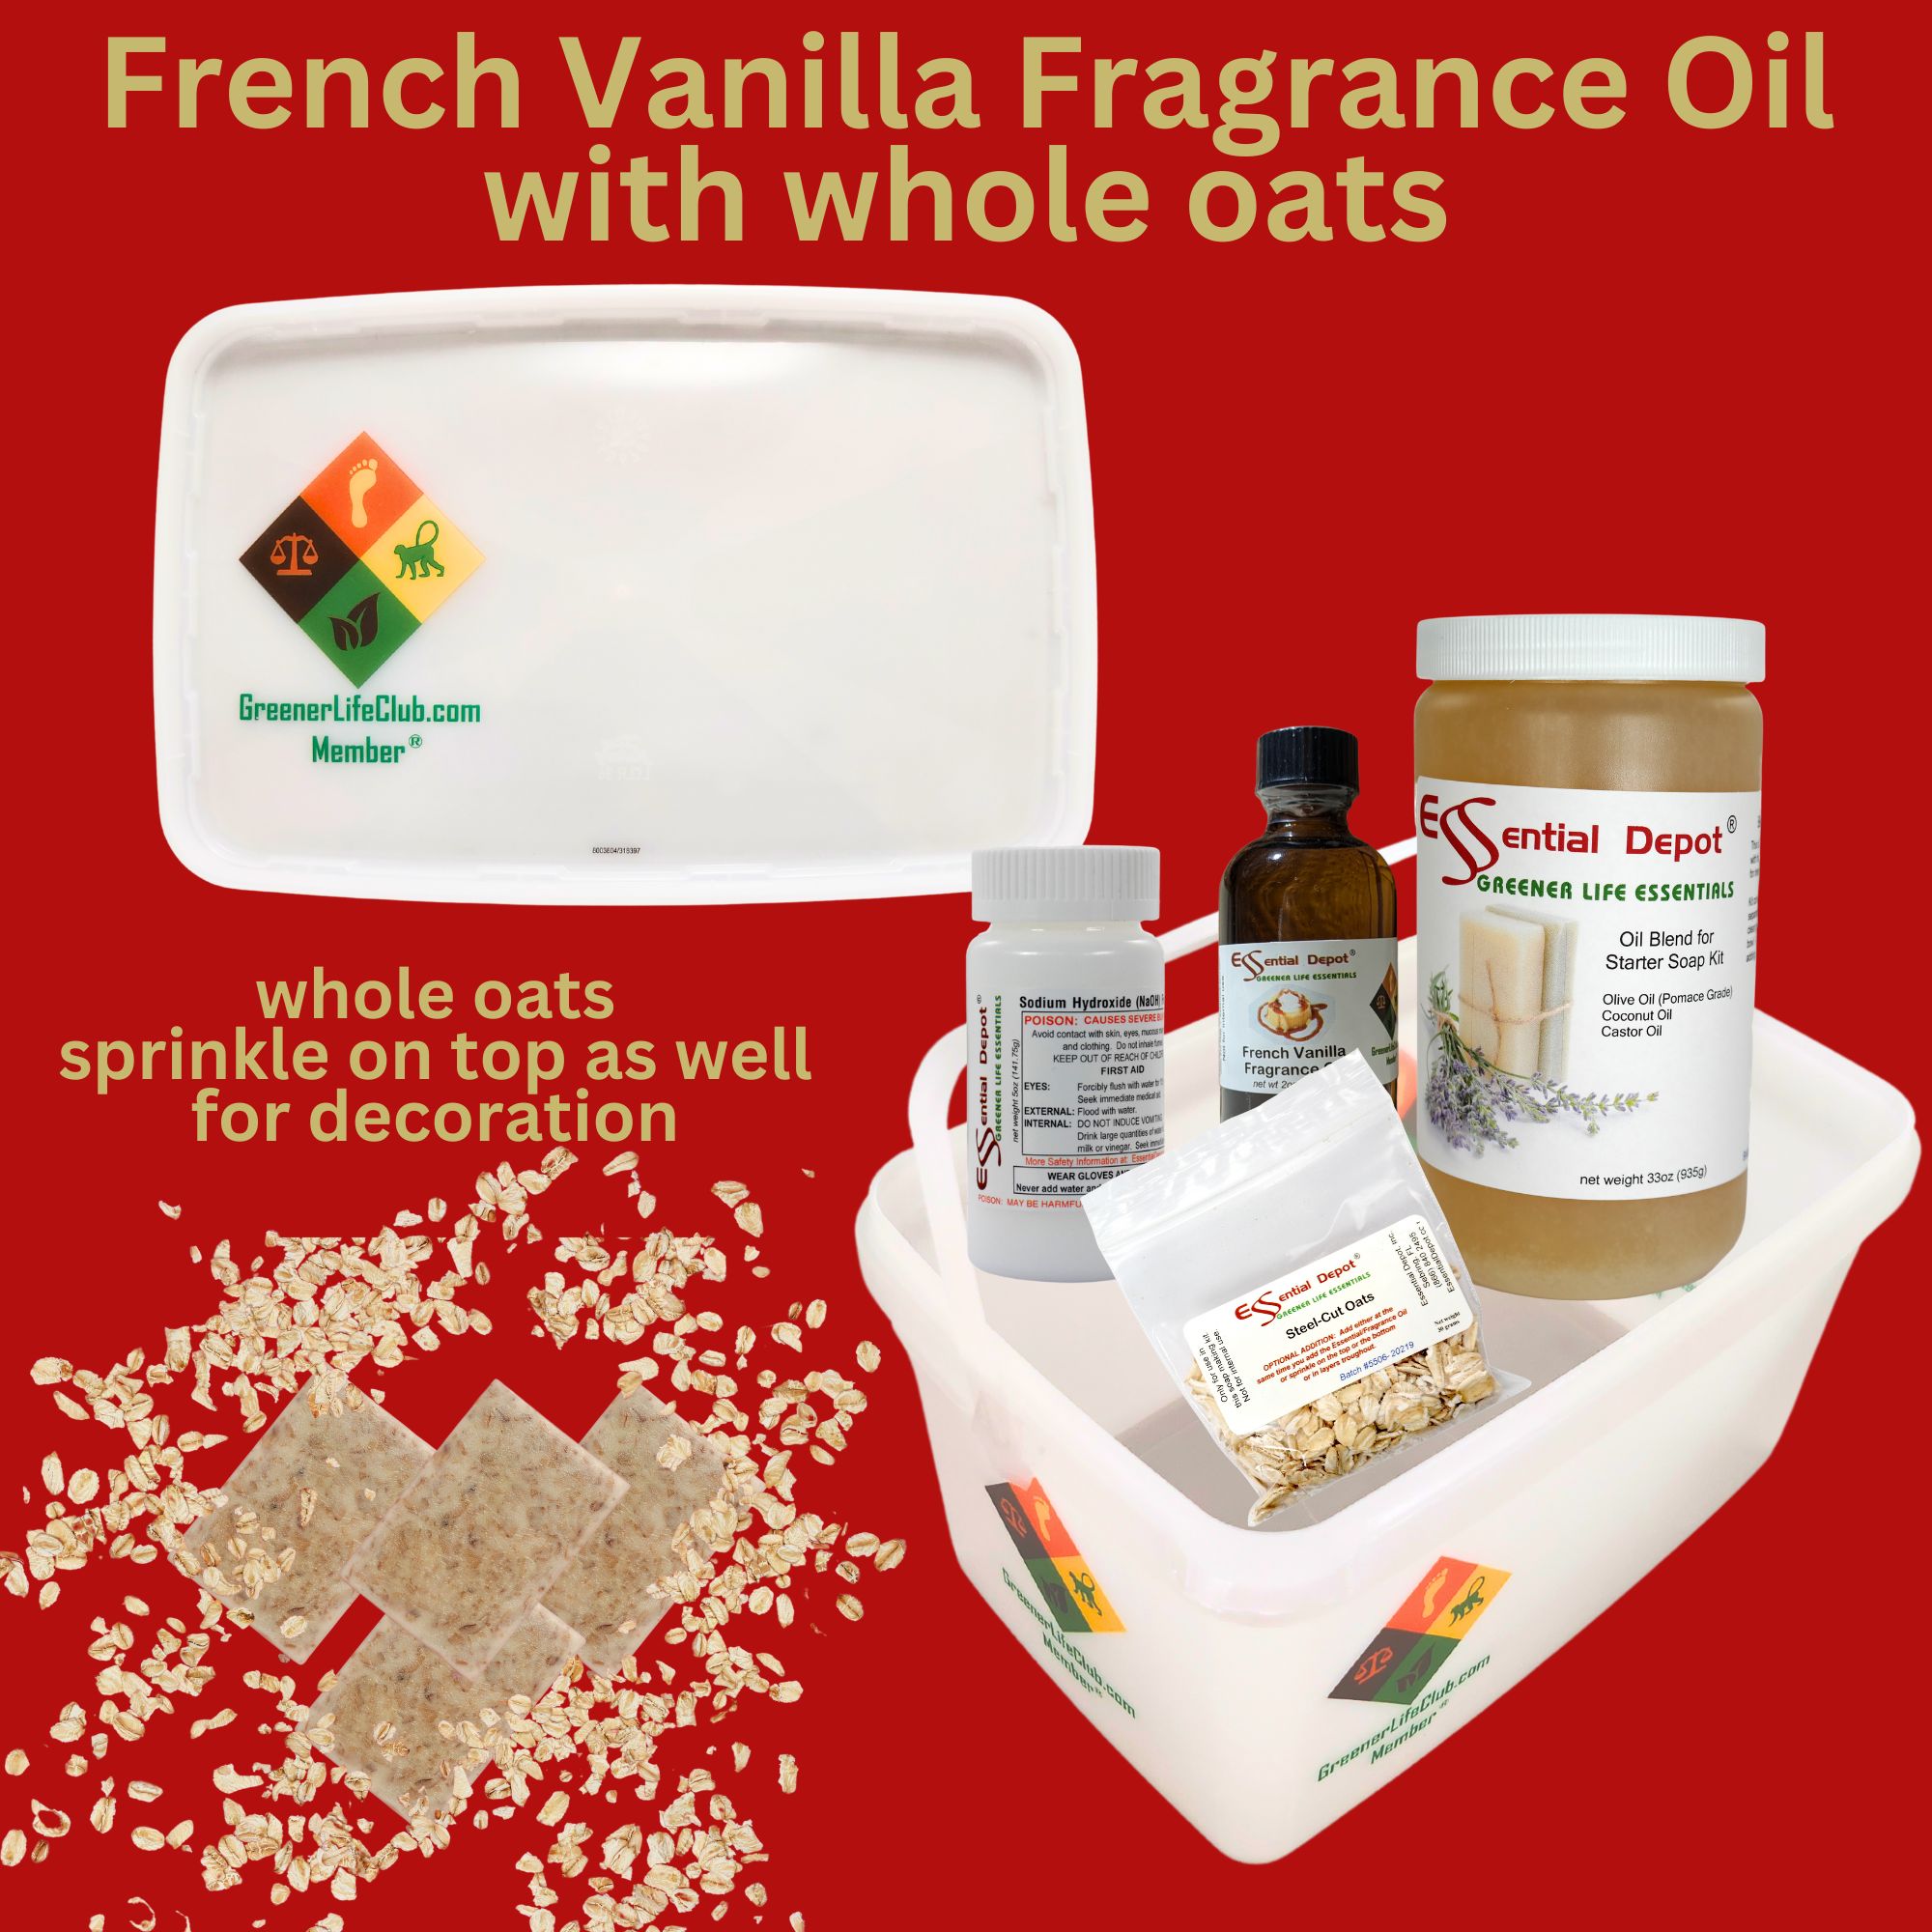 French Vanilla Fragrance Oil with whole rolled oats